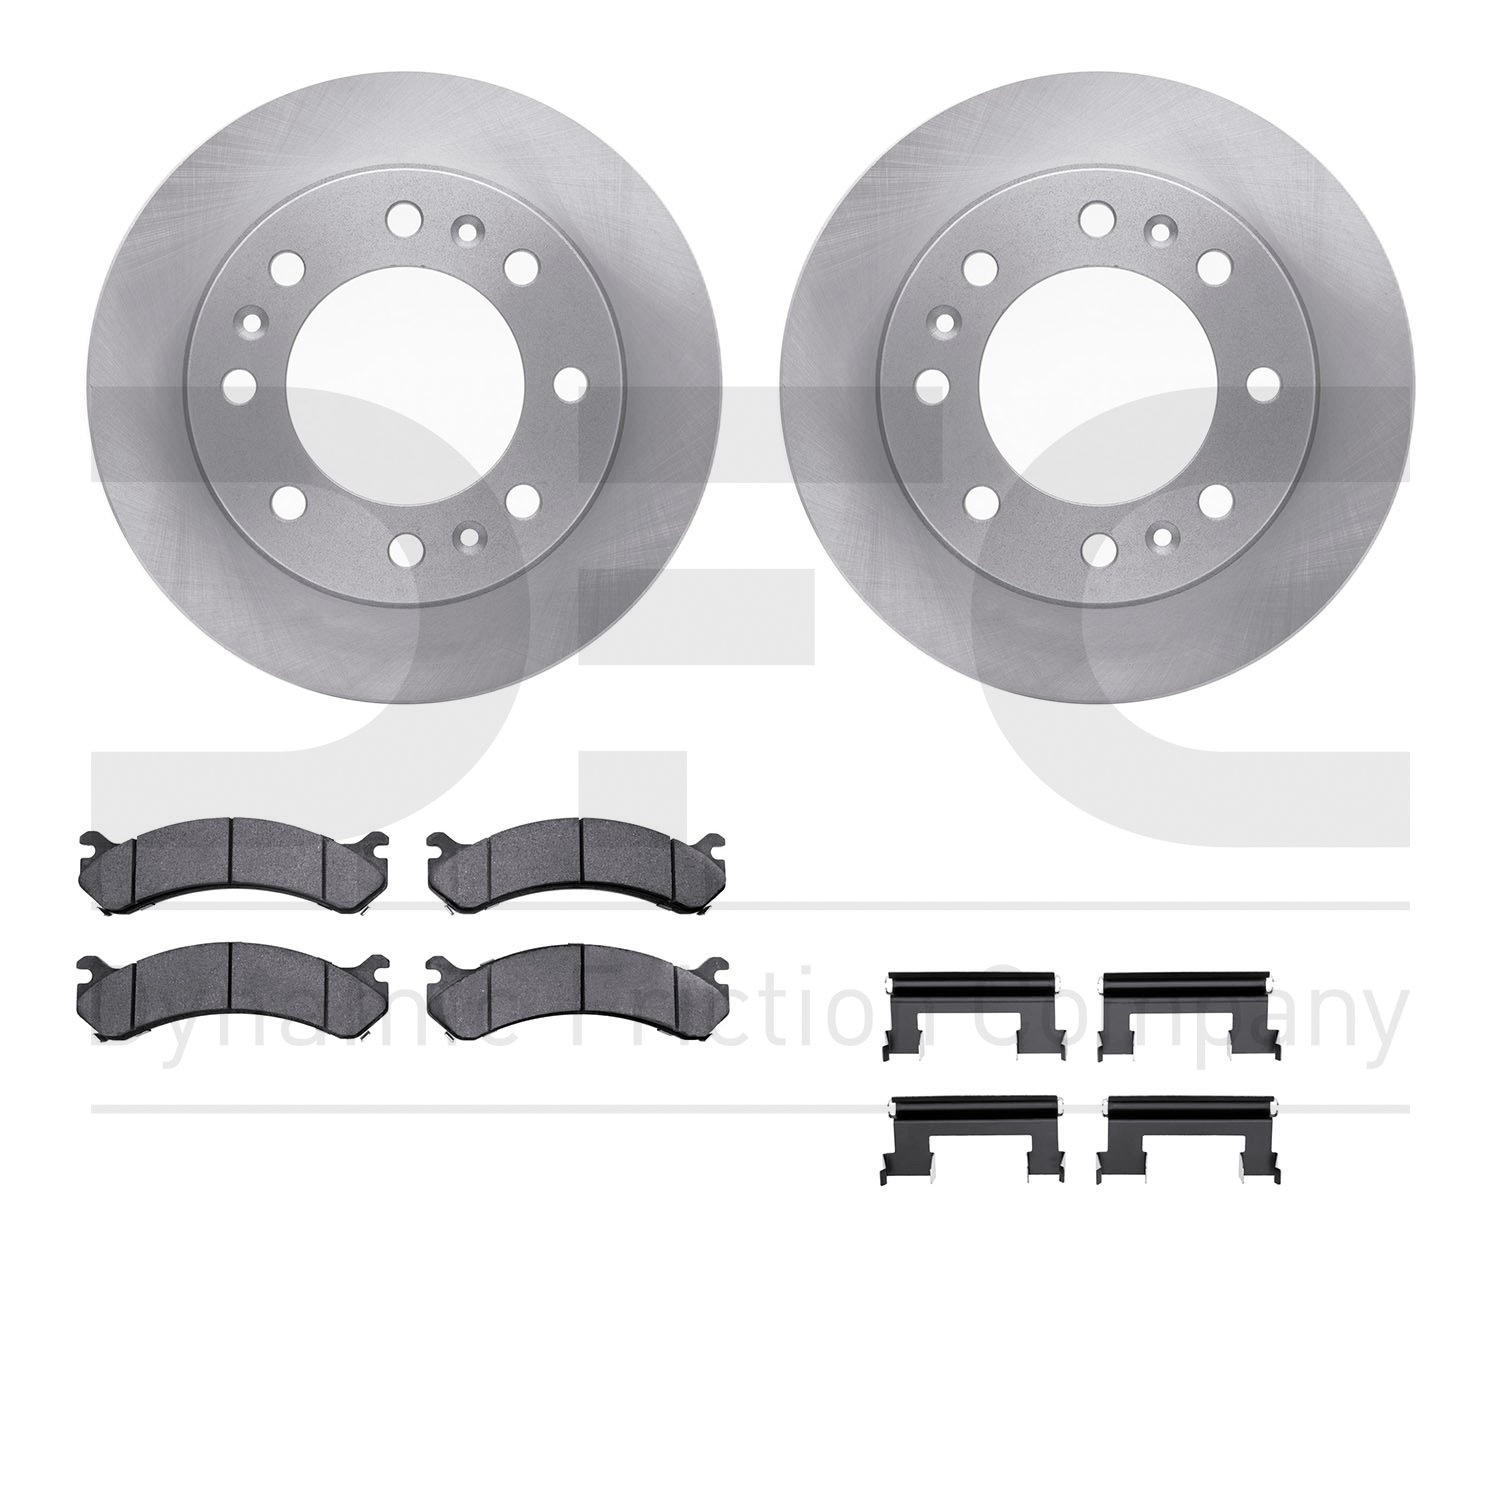 6412-46022 Brake Rotors with Ultimate-Duty Brake Pads Kit & Hardware, 2006-2011 GM, Position: Front